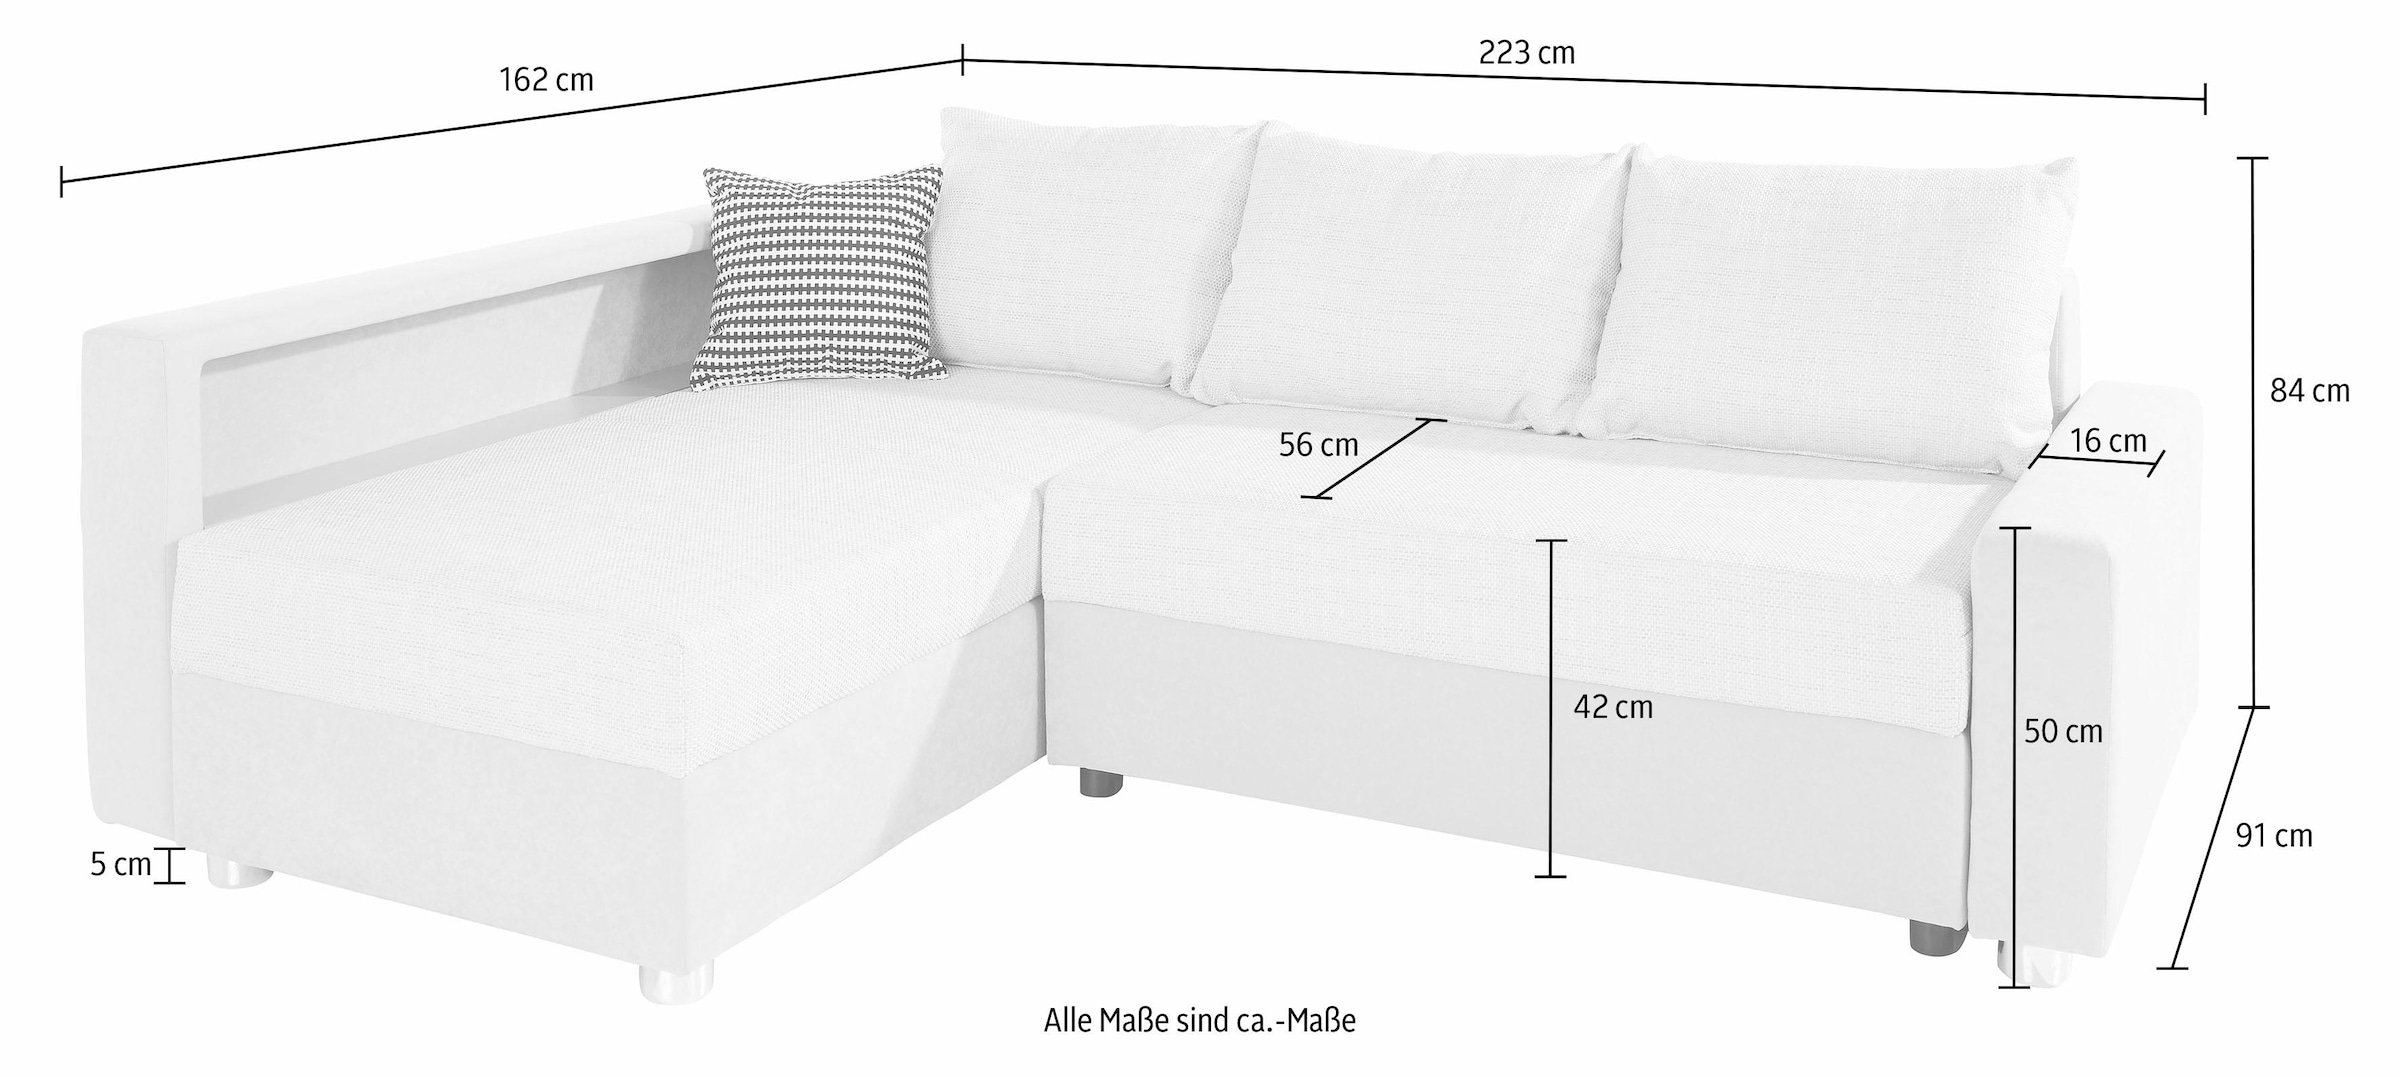 wahlweise Ecksofa »Relax«, Federkern, Bettfunktion, mit RGB-LED-Beleuchtung COLLECTION inklusive AB